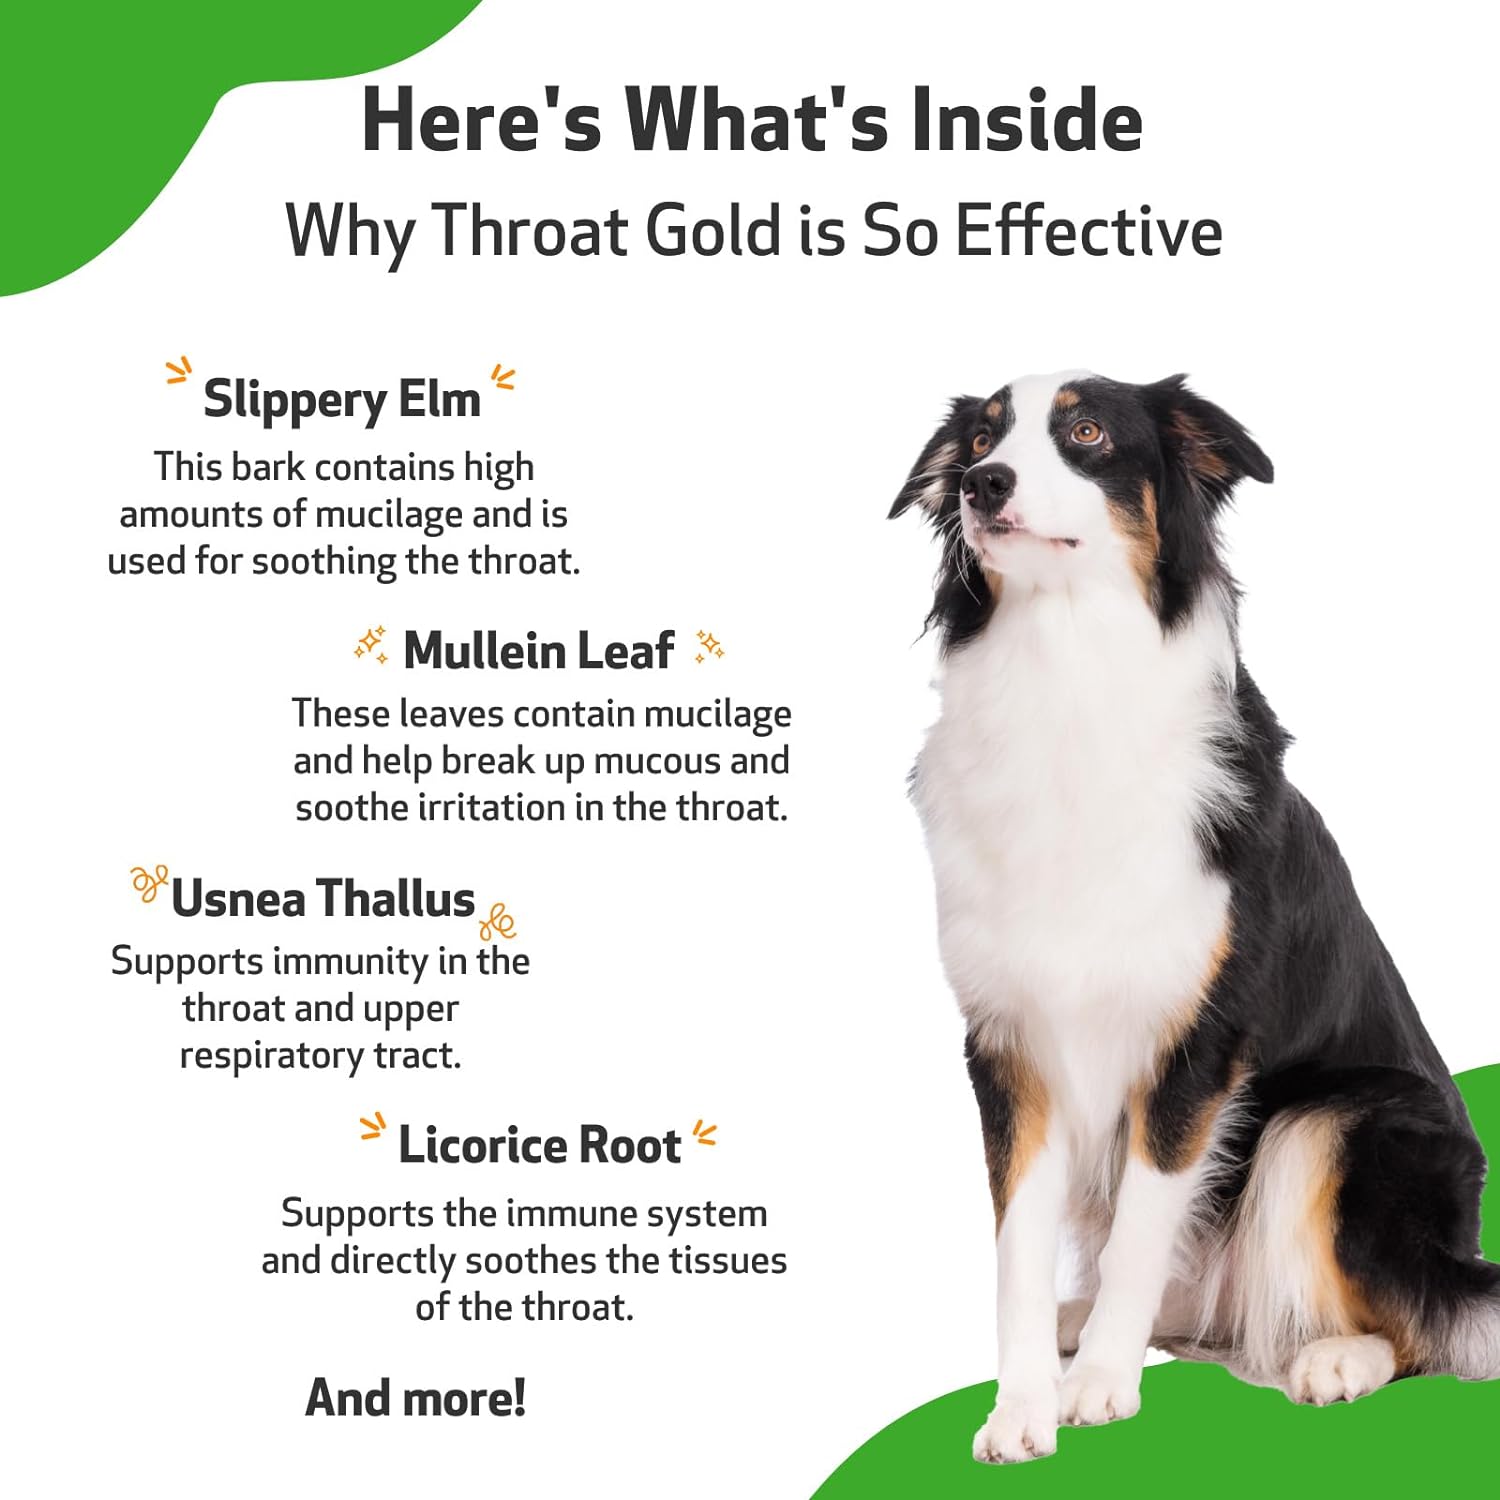 Pet Wellbeing Throat Gold for Dogs - Vet-Formulated - Soothes Throat Discomfort, Hoarseness, Leash Strain, Occasional Cough in Dogs - Natural Herbal Supplement 2 oz (59 ml) : Pet Supplies